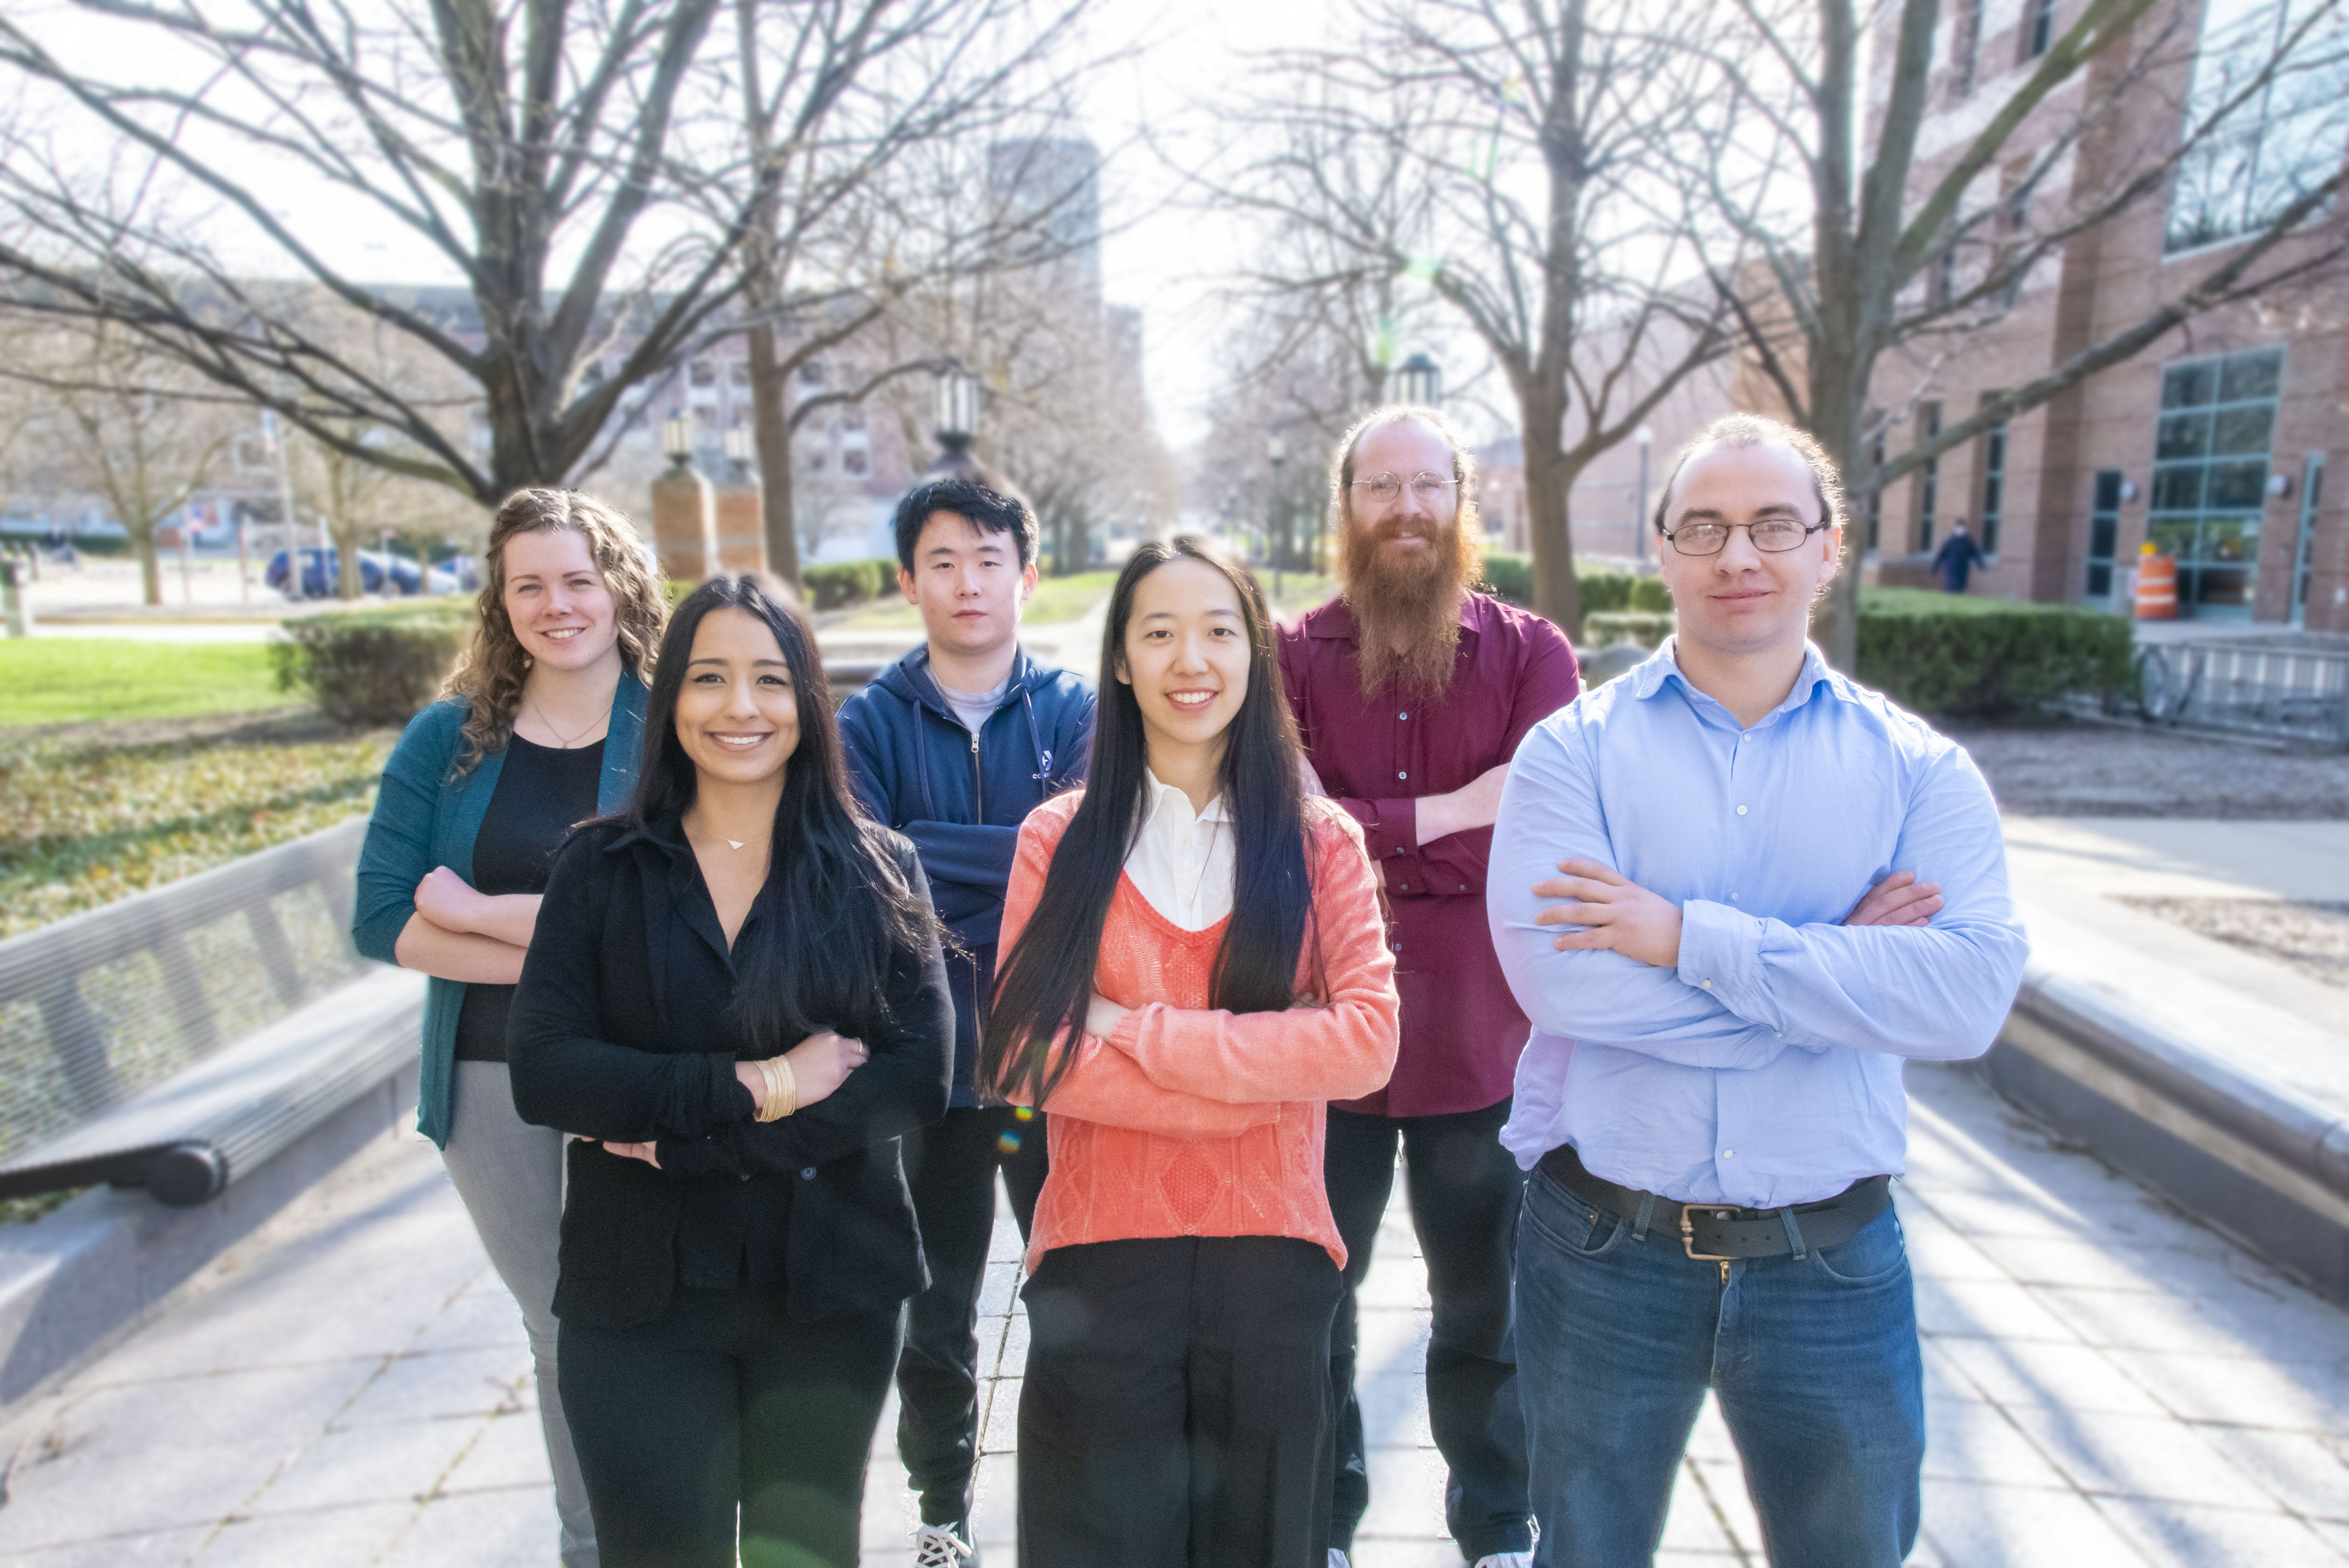 Beckman's six 2023 postdoctoral fellows posed in a group photo outside the institute. The background is blurred.